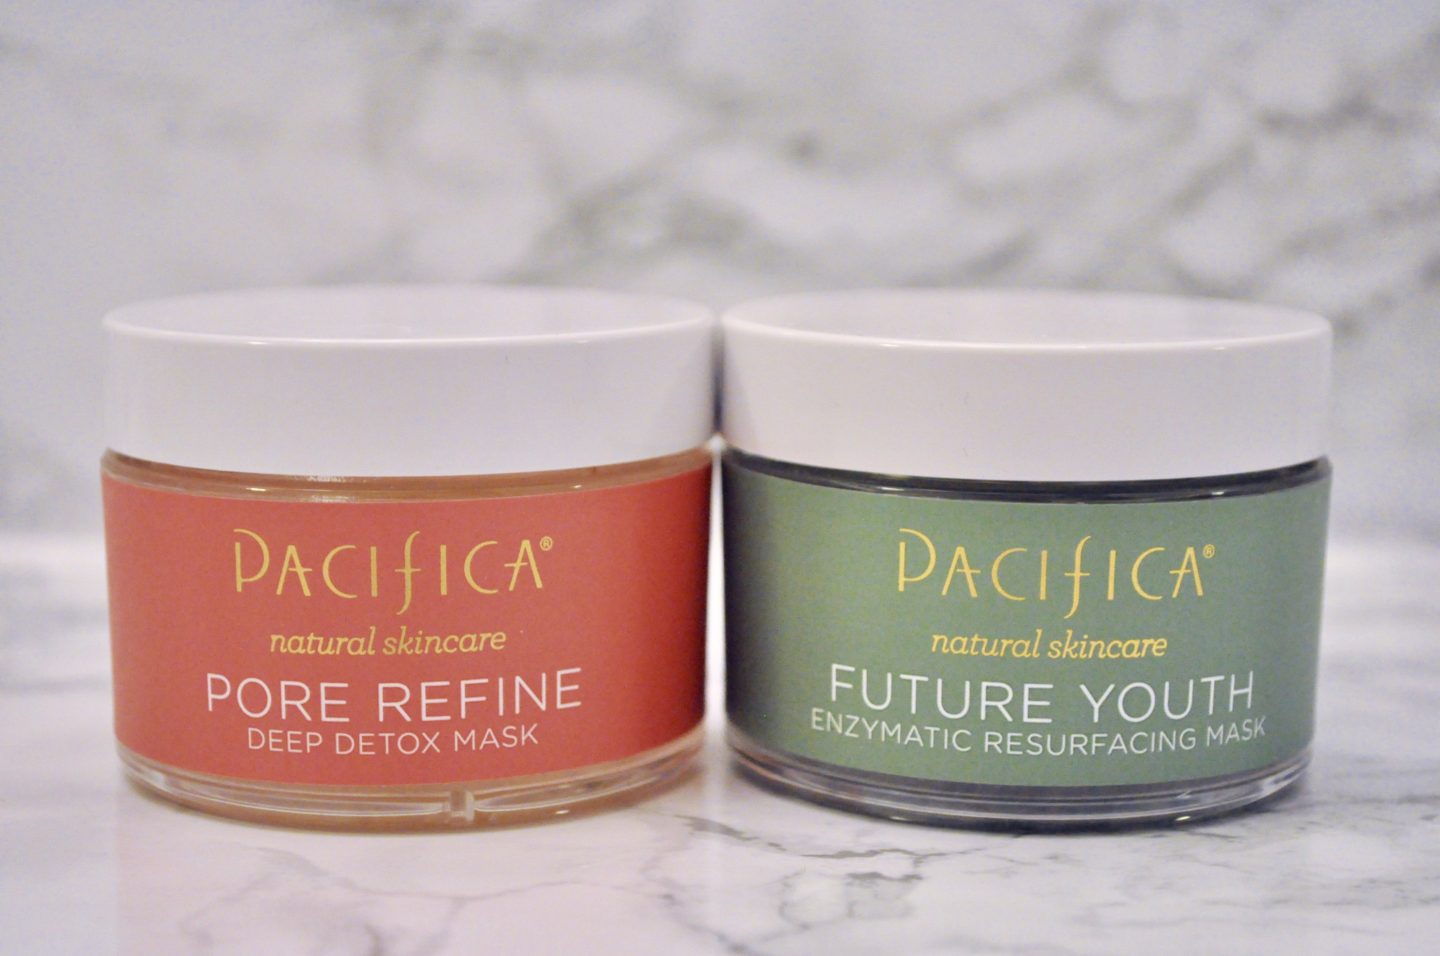 Pacifica face masks